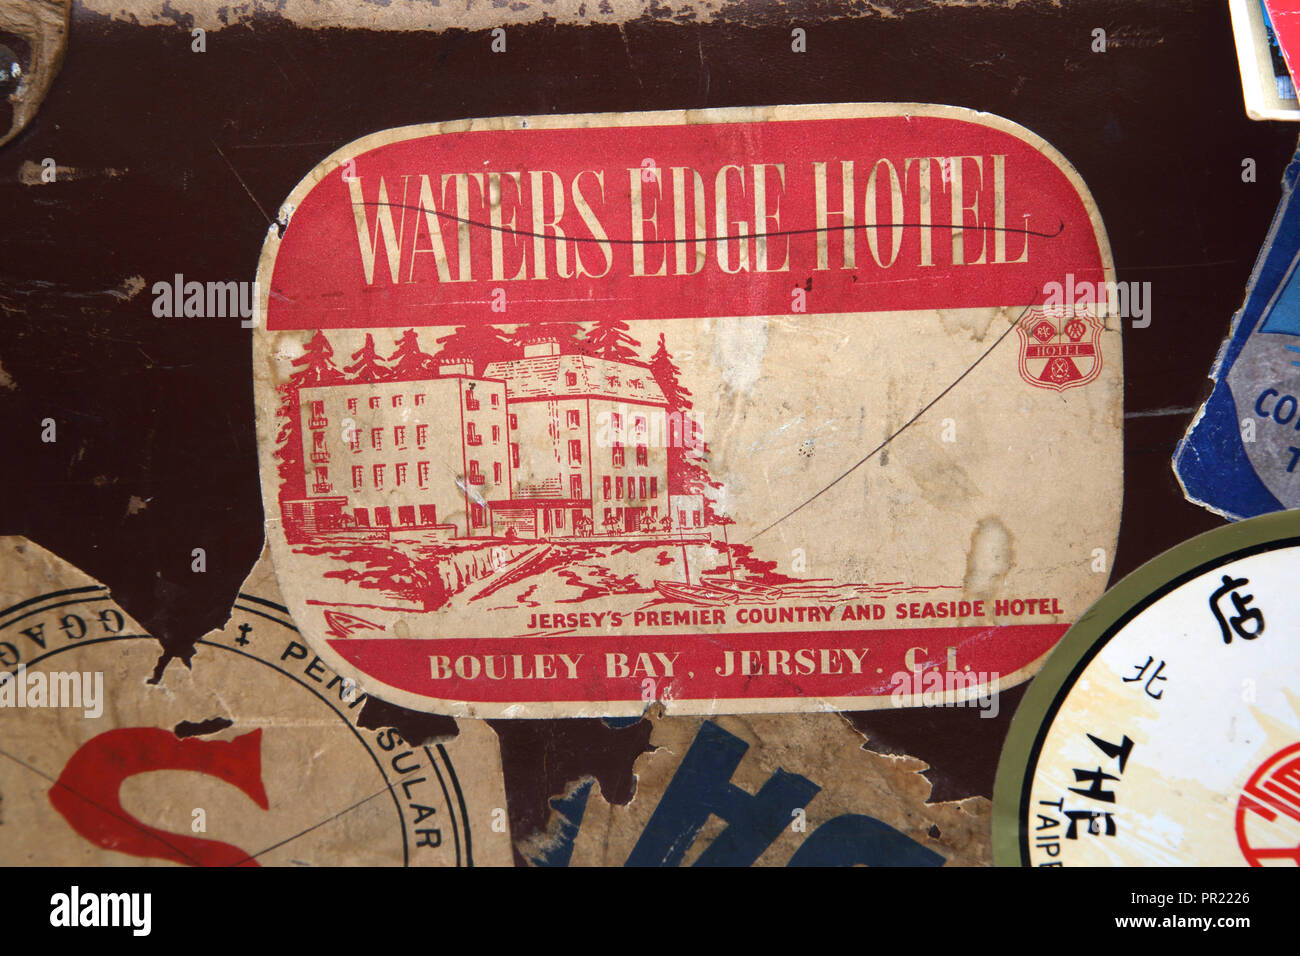 winkel Caius krab Vintage Leather Everlasta Suitcase with Travel Stickers - Waters Edge Hotel  Bouley Bay Jersey Stock Photo - Alamy